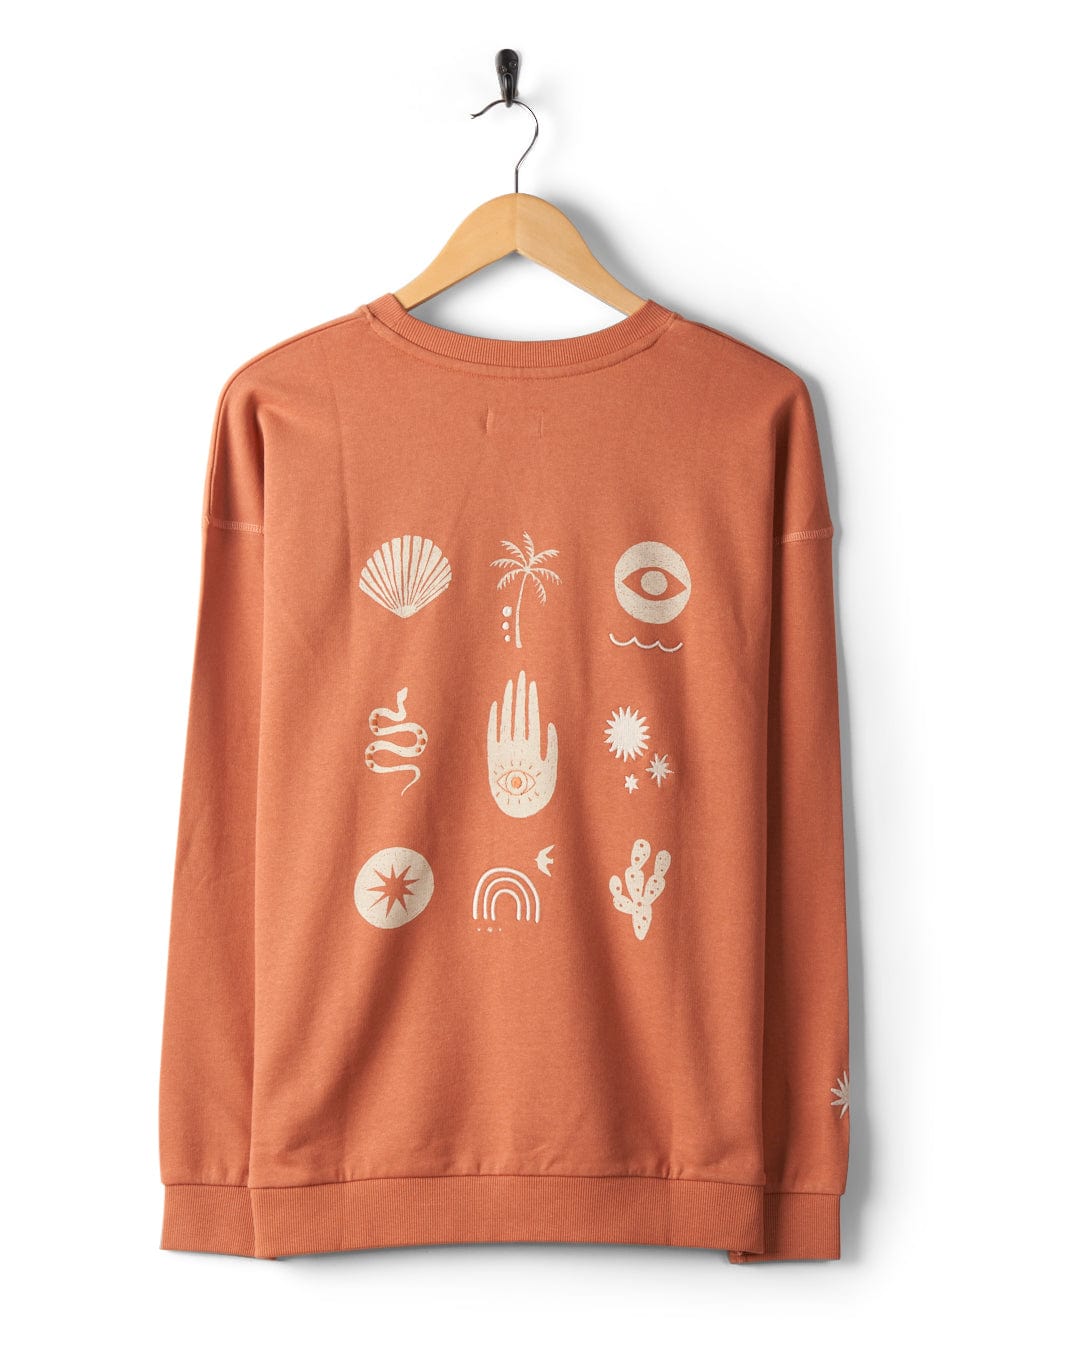 A Saltrock Journey - Womens Sweatshirt - Peach hangs on a wooden hanger, showcasing 100% cotton comfort. The back features embroidered graphic symbols in white, including a palm tree, a hand, a snake, and celestial elements. Enjoy the relaxed fit of this unique piece.